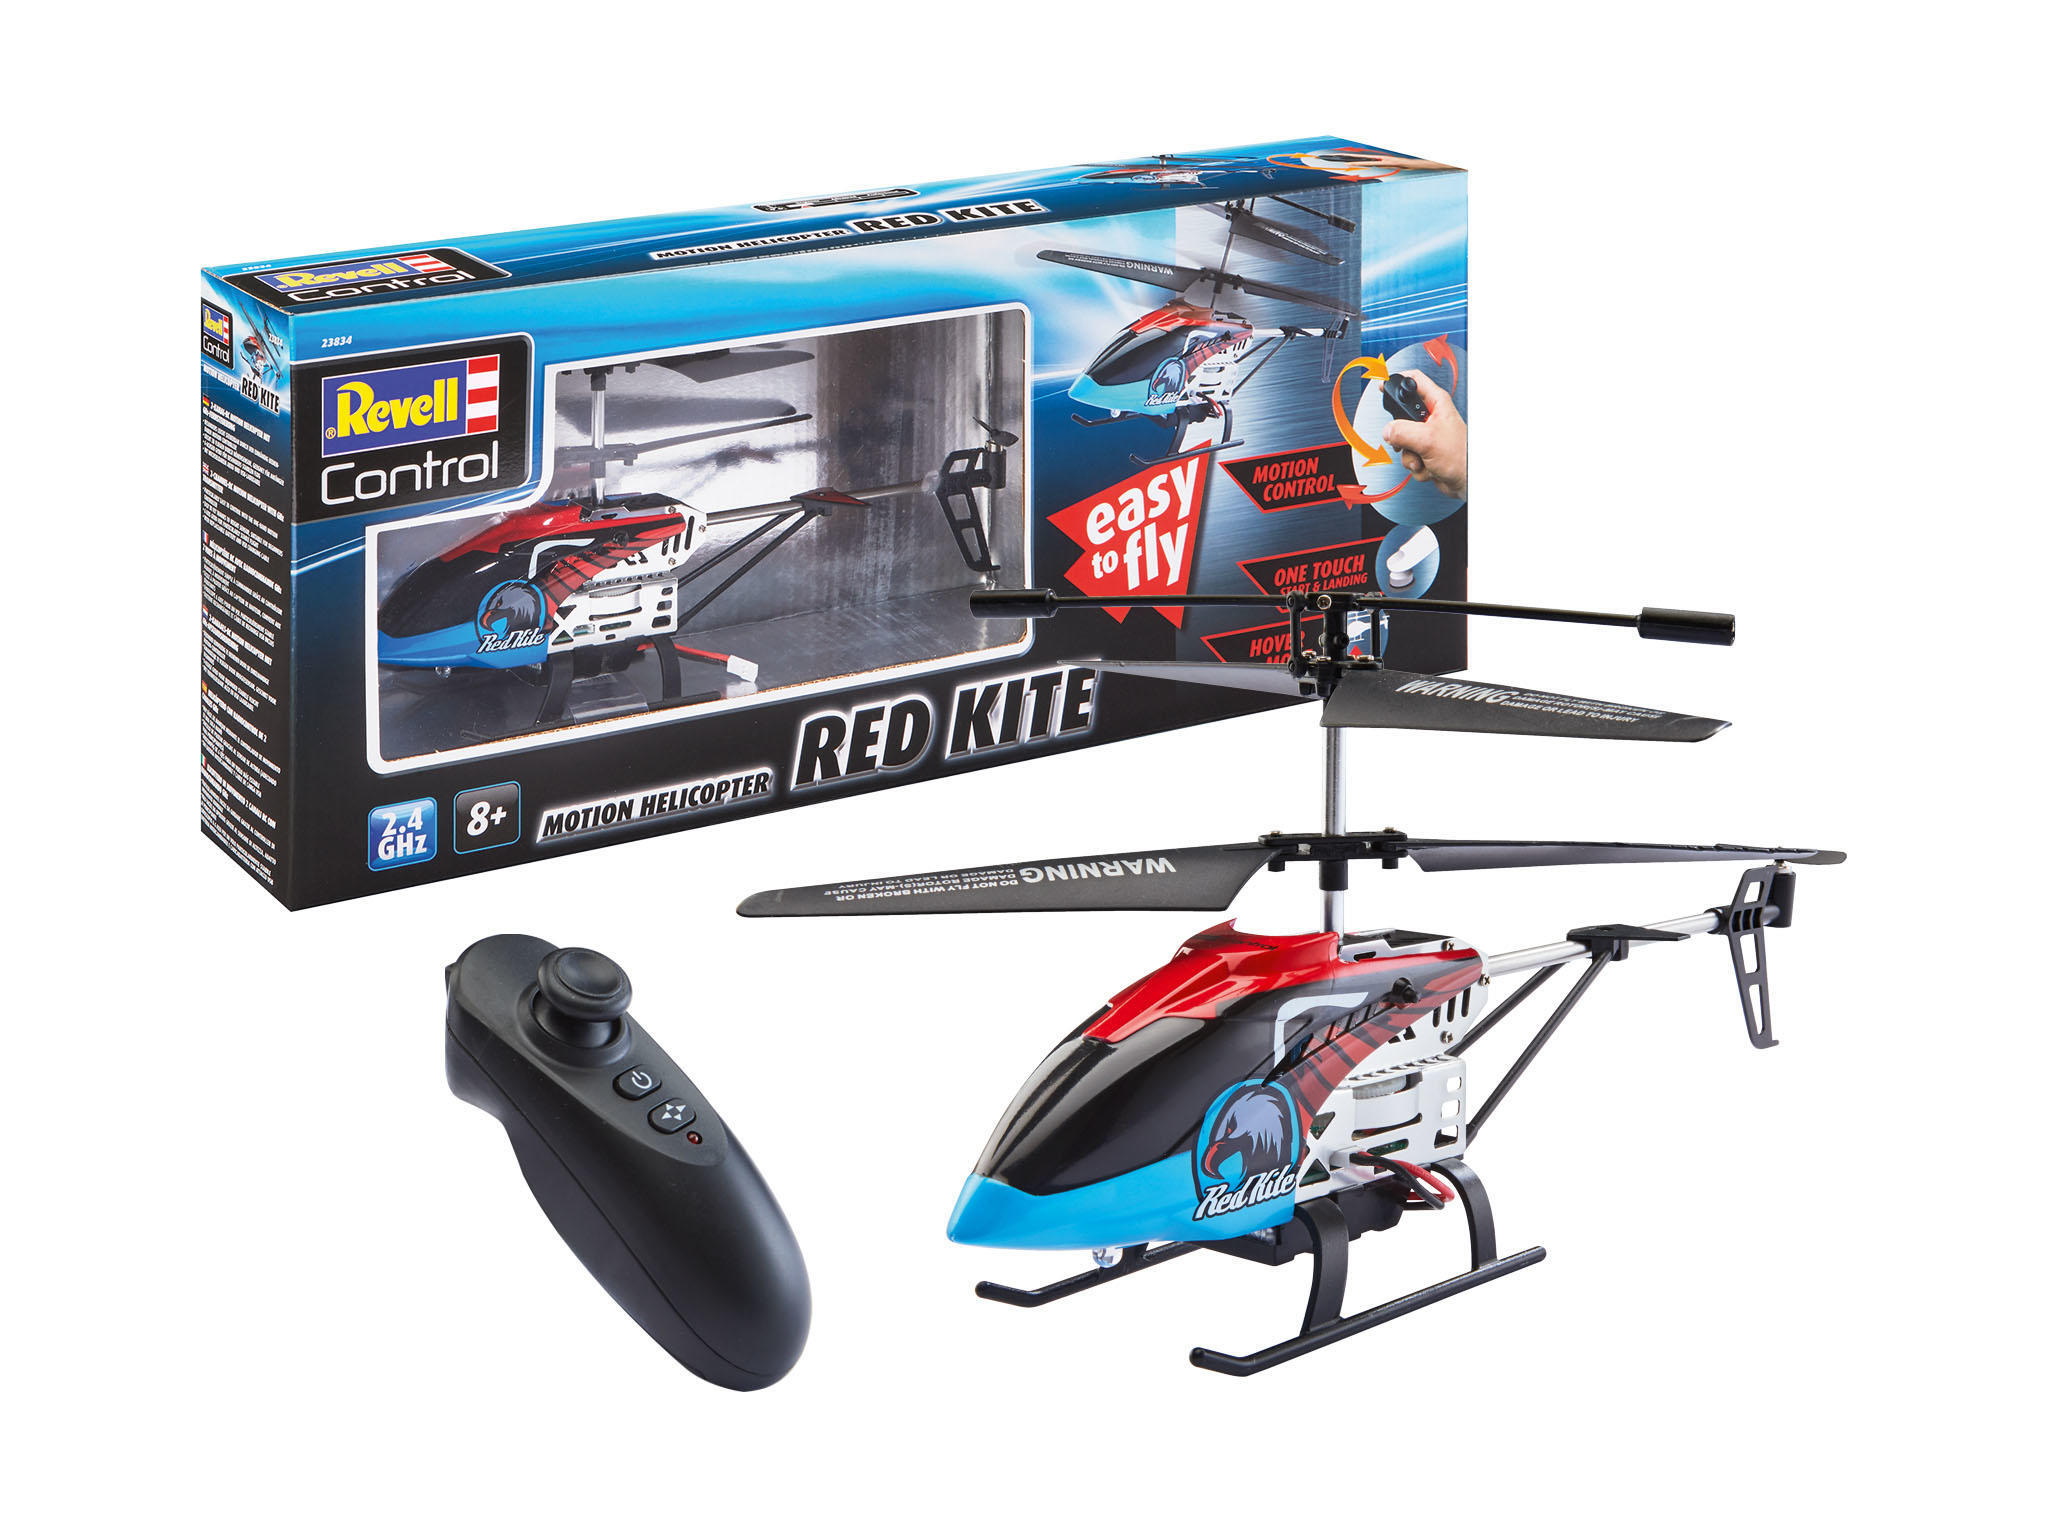 Revell 23834 RC Helikopter "Red Kite" Motion Control Revell Control Ferngesteuerter Hubschrauber